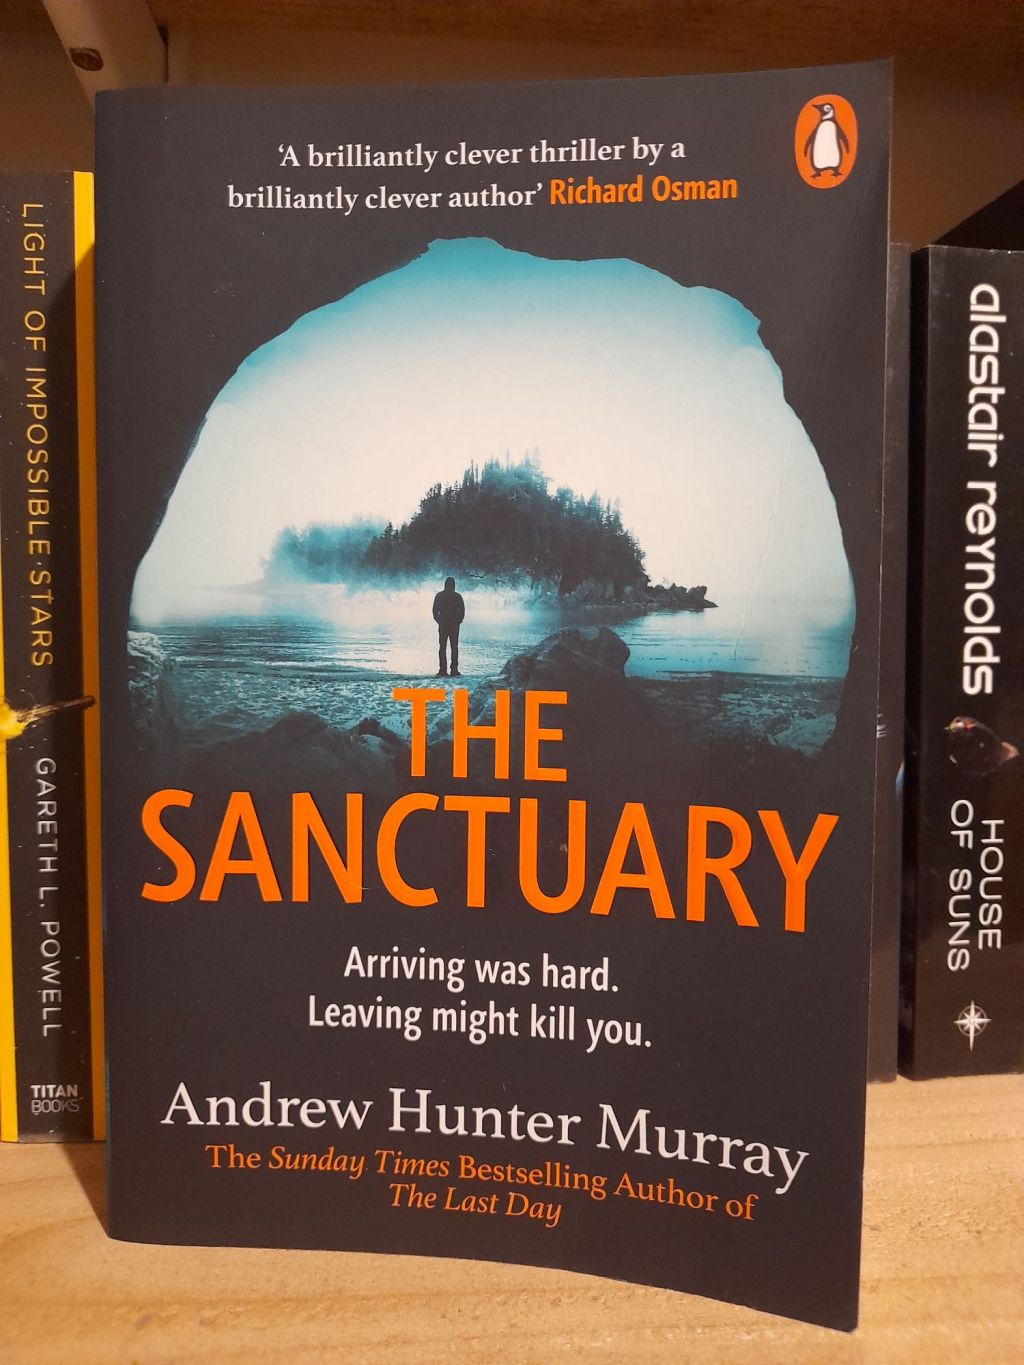 BOOK REVVIEW: The Sanctuary, by Andrew Hunter Murray